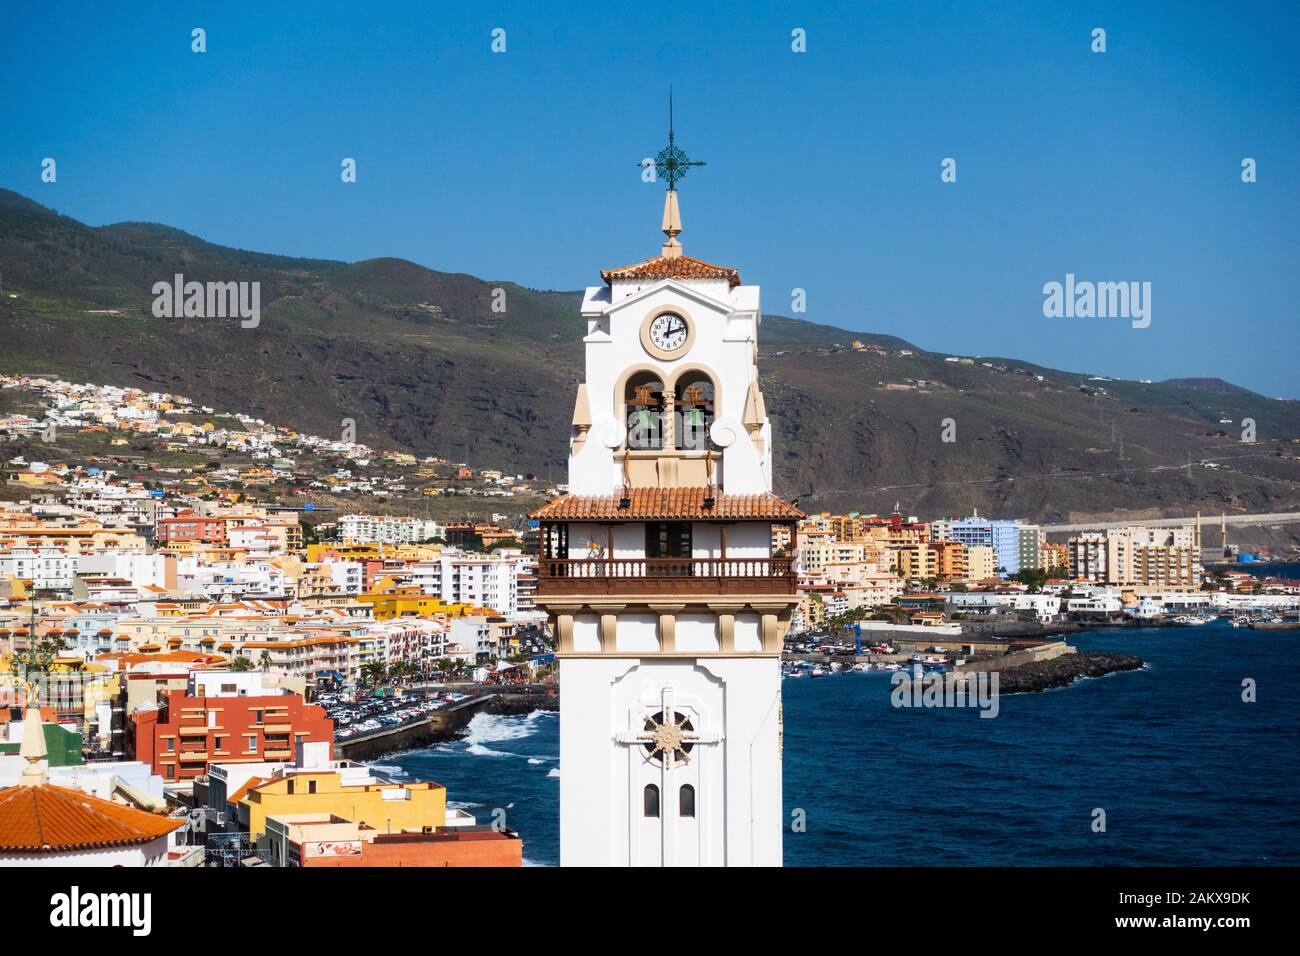 Candelaria, Tenerife, Spain - 27 December, 2019. Beautiful view on Candelaria town with Basilica de Nuestra Senora de Candelaria Church on the foregro Stock Photo